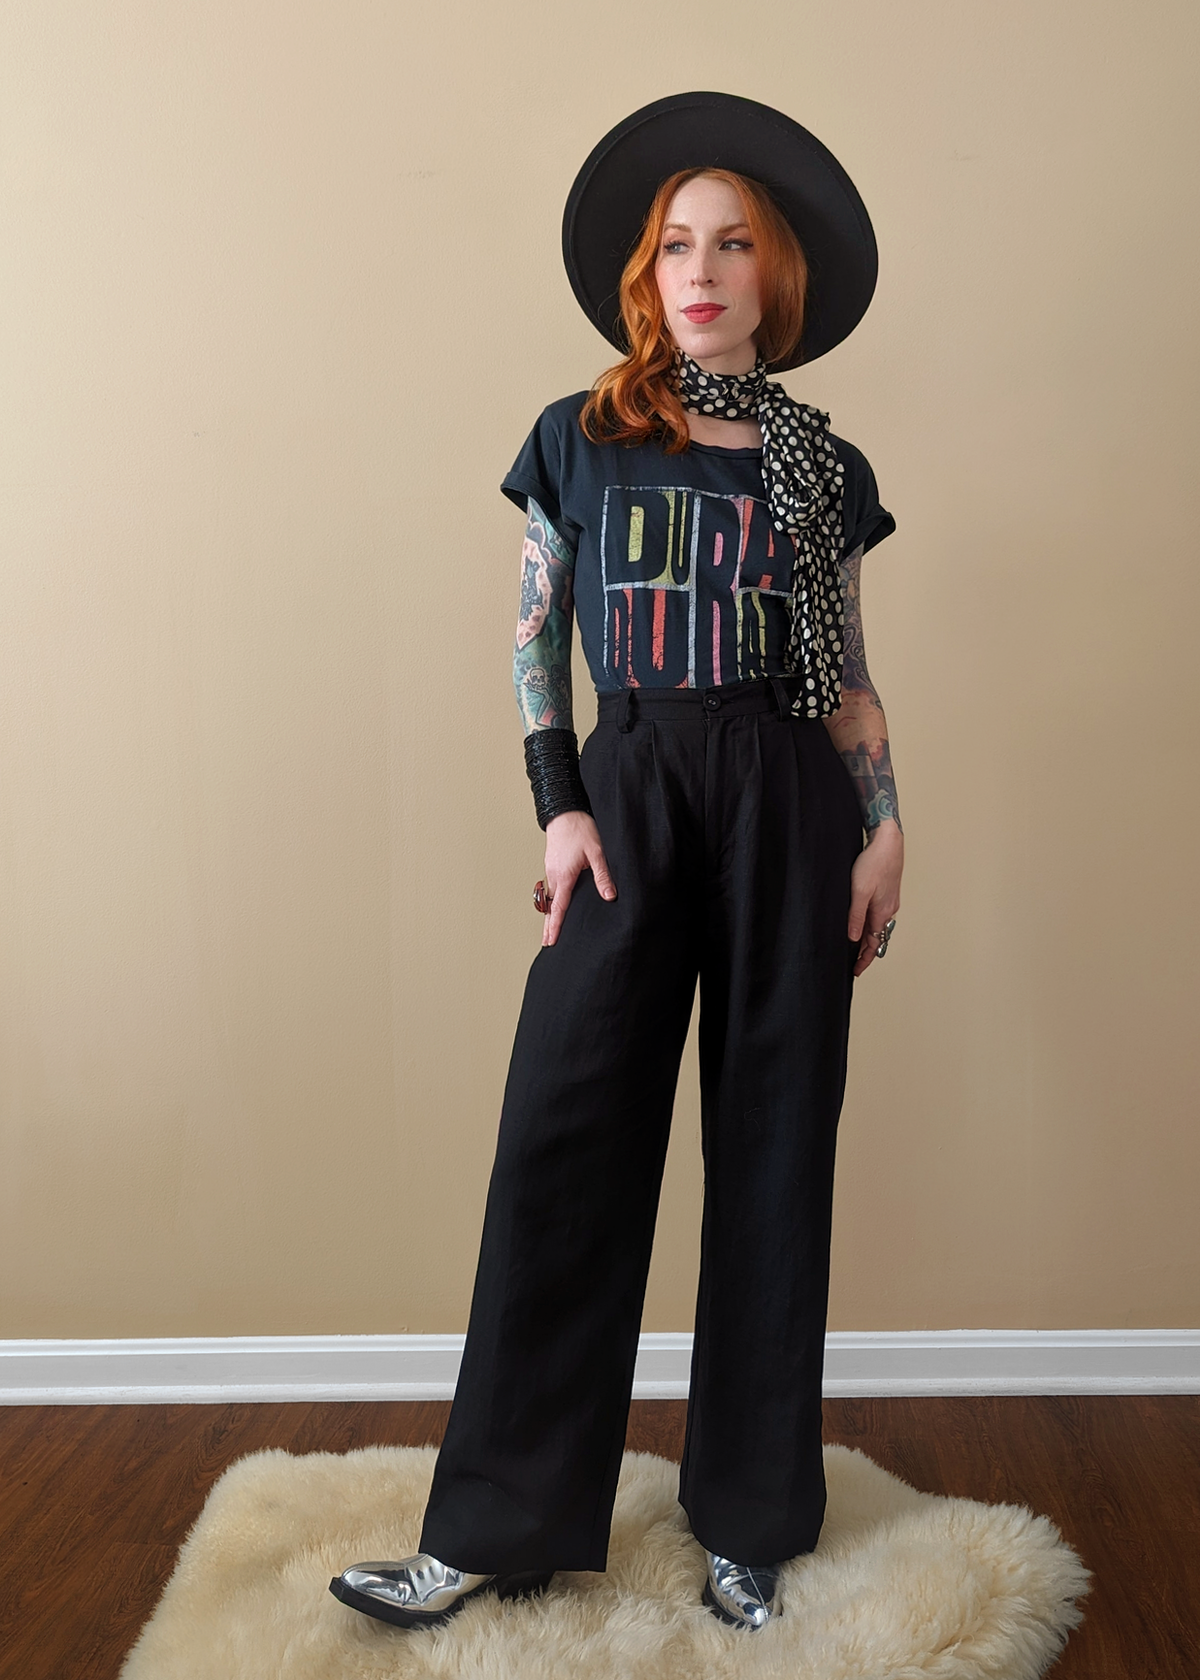 The Rolla's Jeans Chloe Pleat Linen pant: 80s menswear inspired black linen blend pants with a high rise waist, pleated front, and relaxed ankle length leg. 